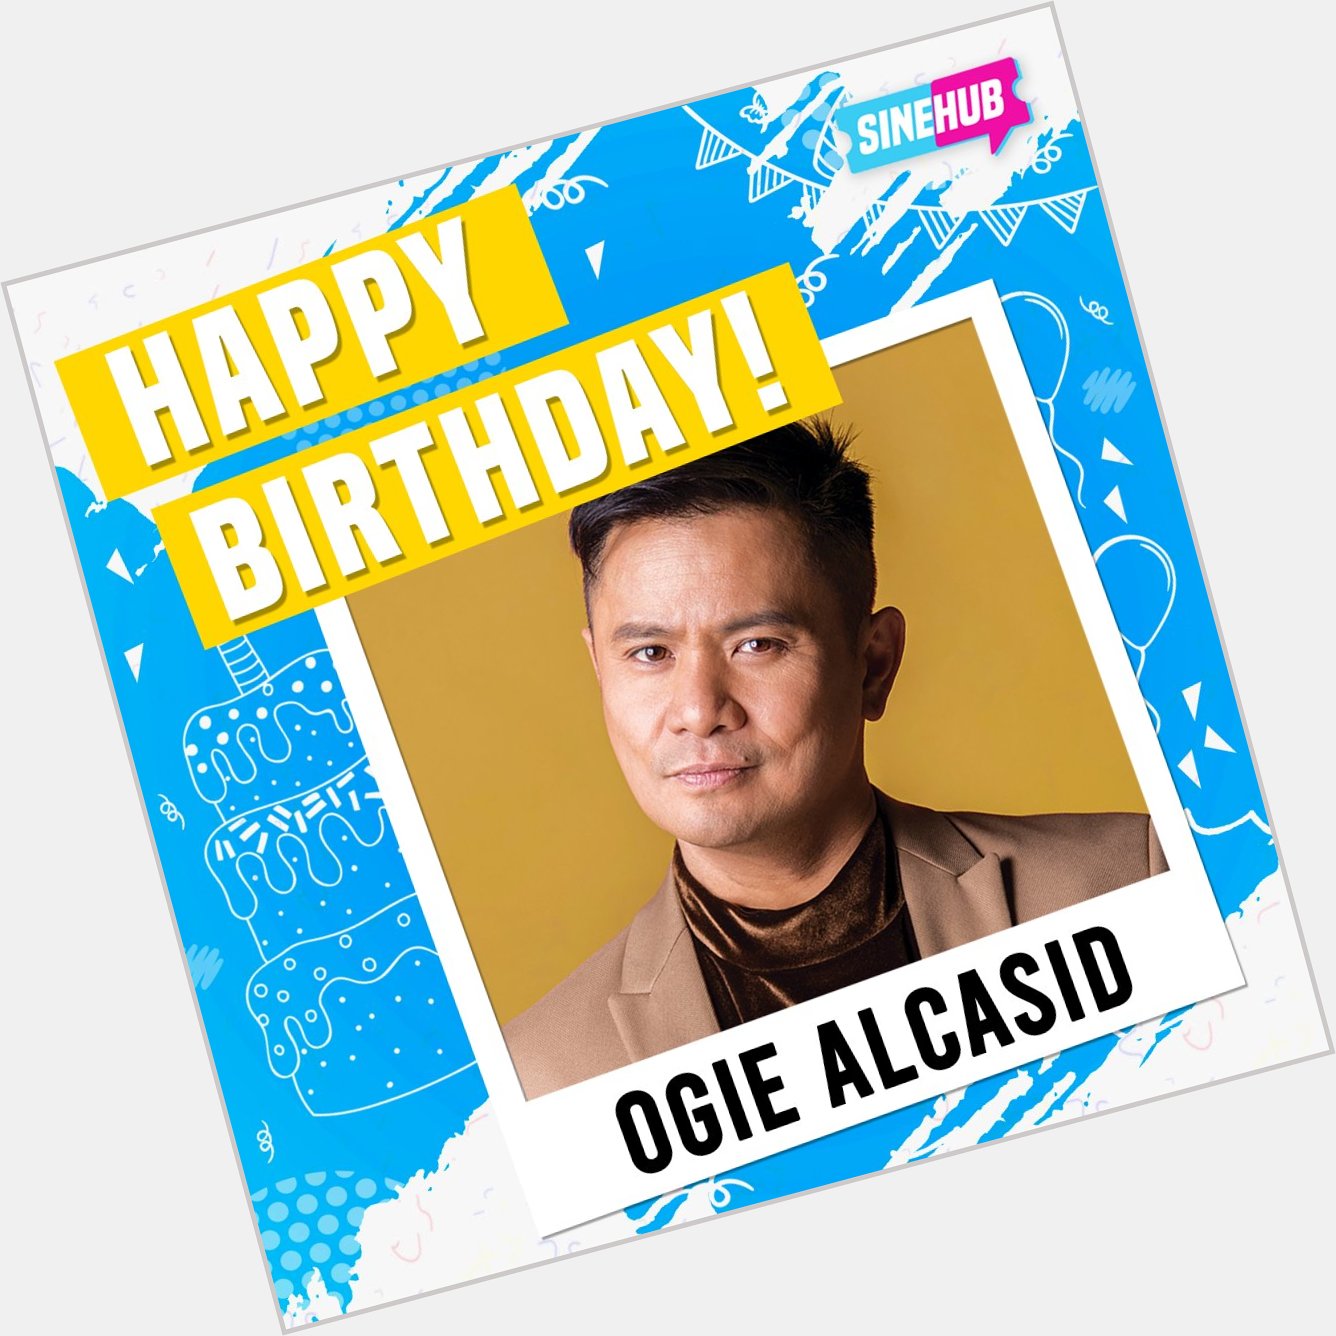 Happy birthday to one of the best Filipino songwriters and musicians of all time! Cheers, Ogie Alcasid! 